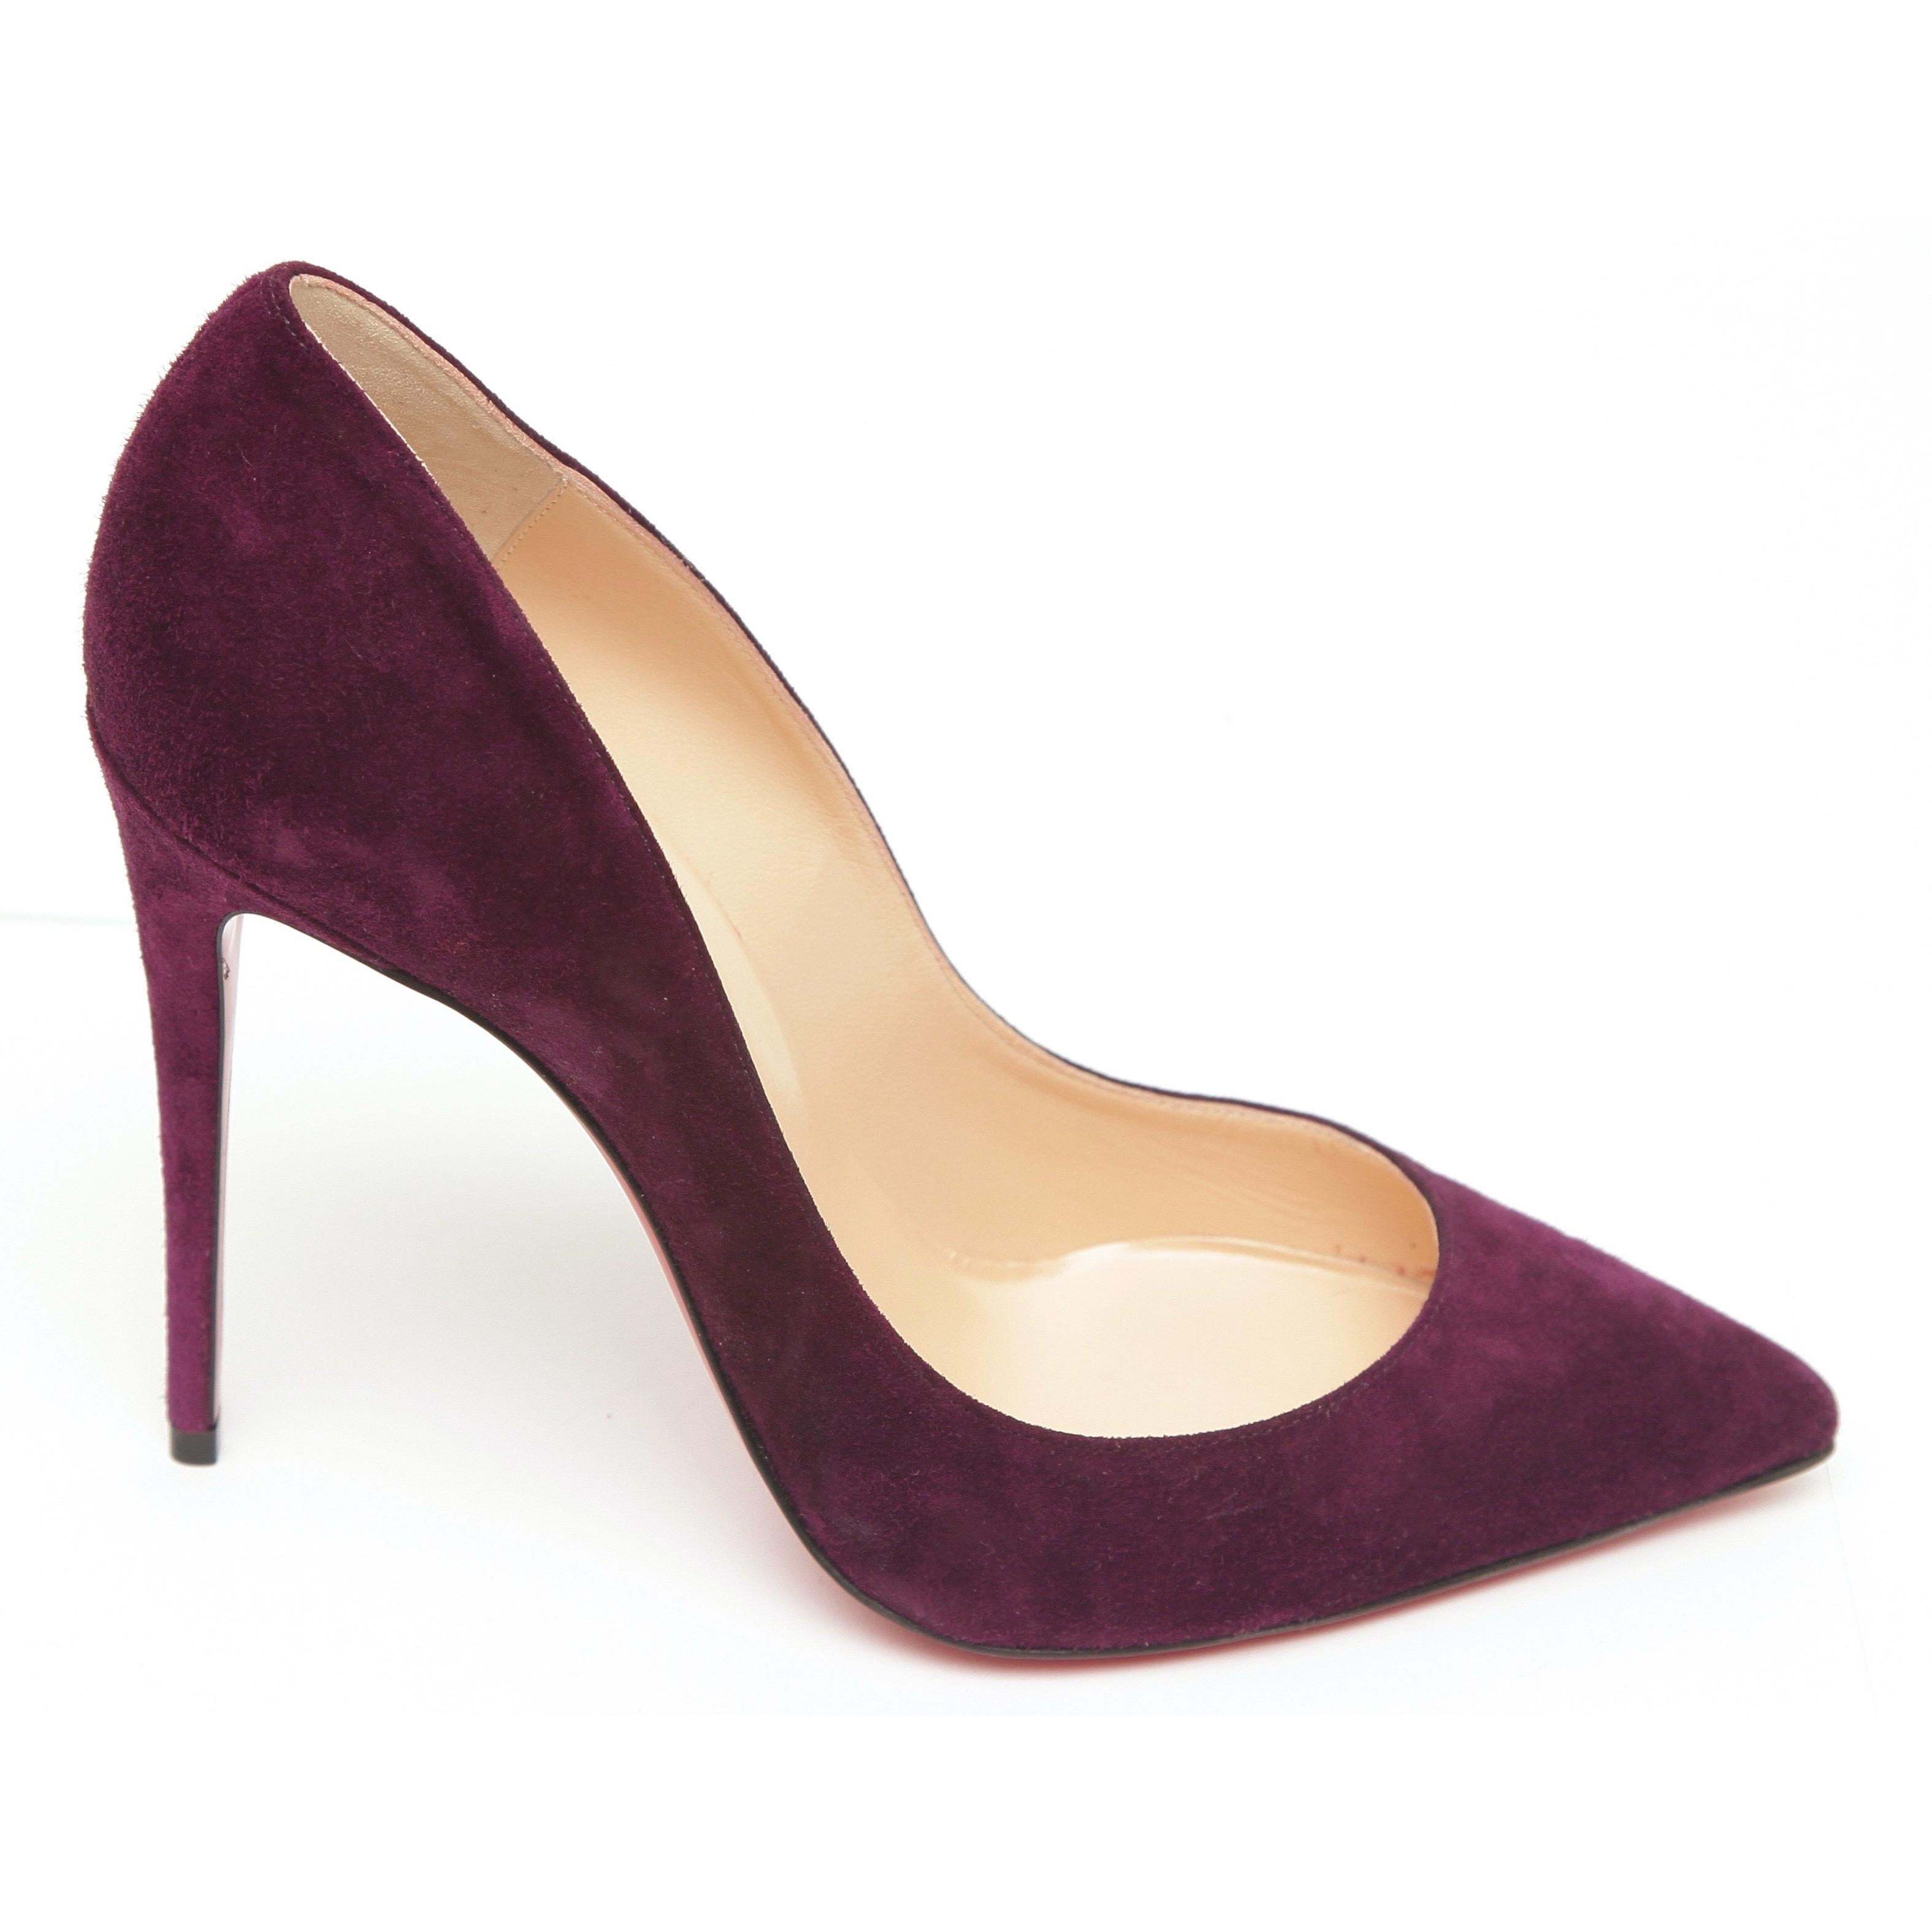 GUARANTEED AUTHENTIC CHRISTIAN LOUBOUTIN PURPLE SUEDE SO KATE 100mm

Design:
- Purple suede classic So Kate 100mm pointed toe pump.
- Self-covered heel.
- Leather lining.
- Signature red leather sole.
- Comes with Christian Louboutin dust